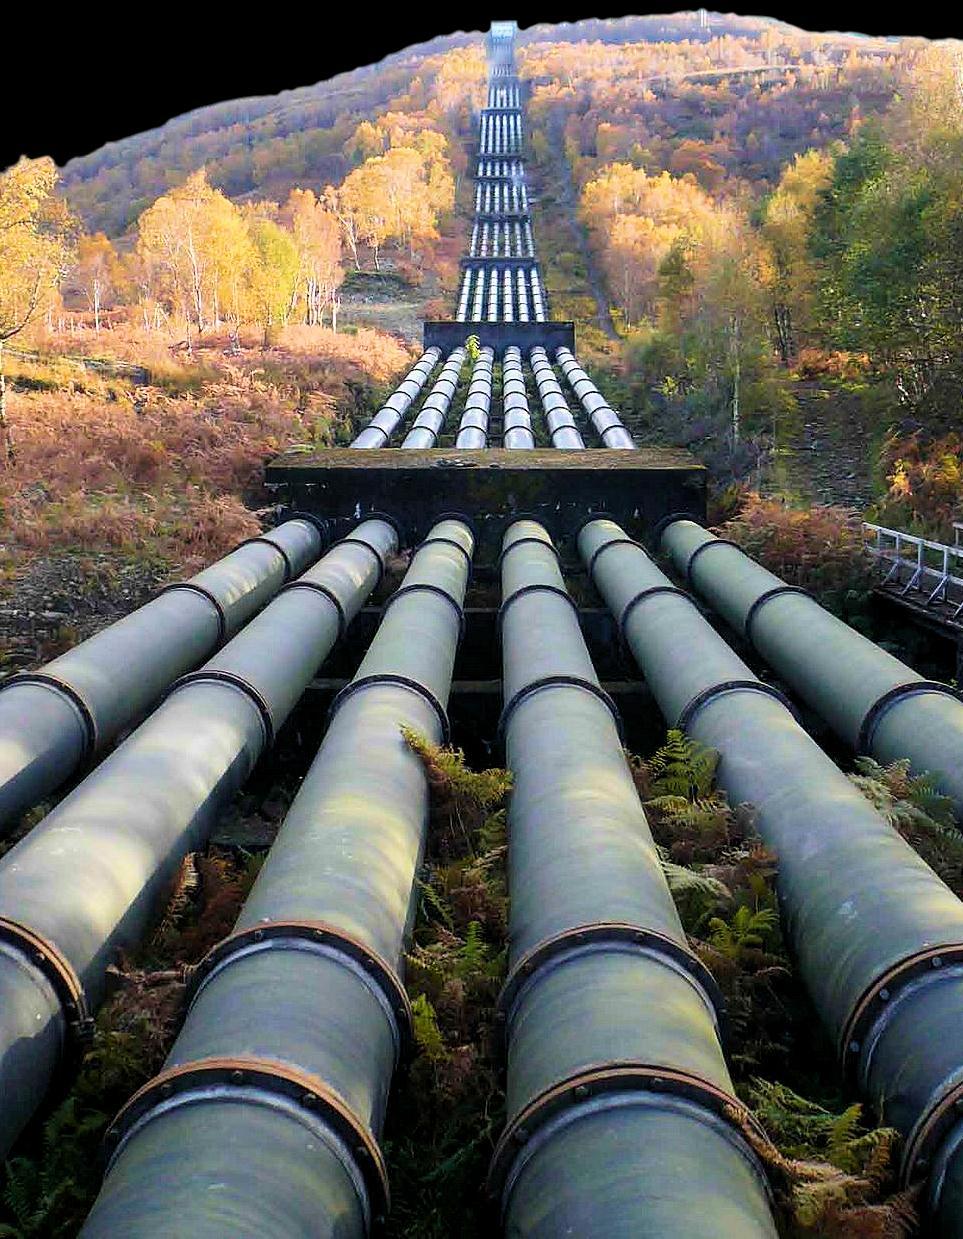 Gas-over-Oil & Direct Gas Systems are typically used for on/off valve control in gas transmission pipelines.